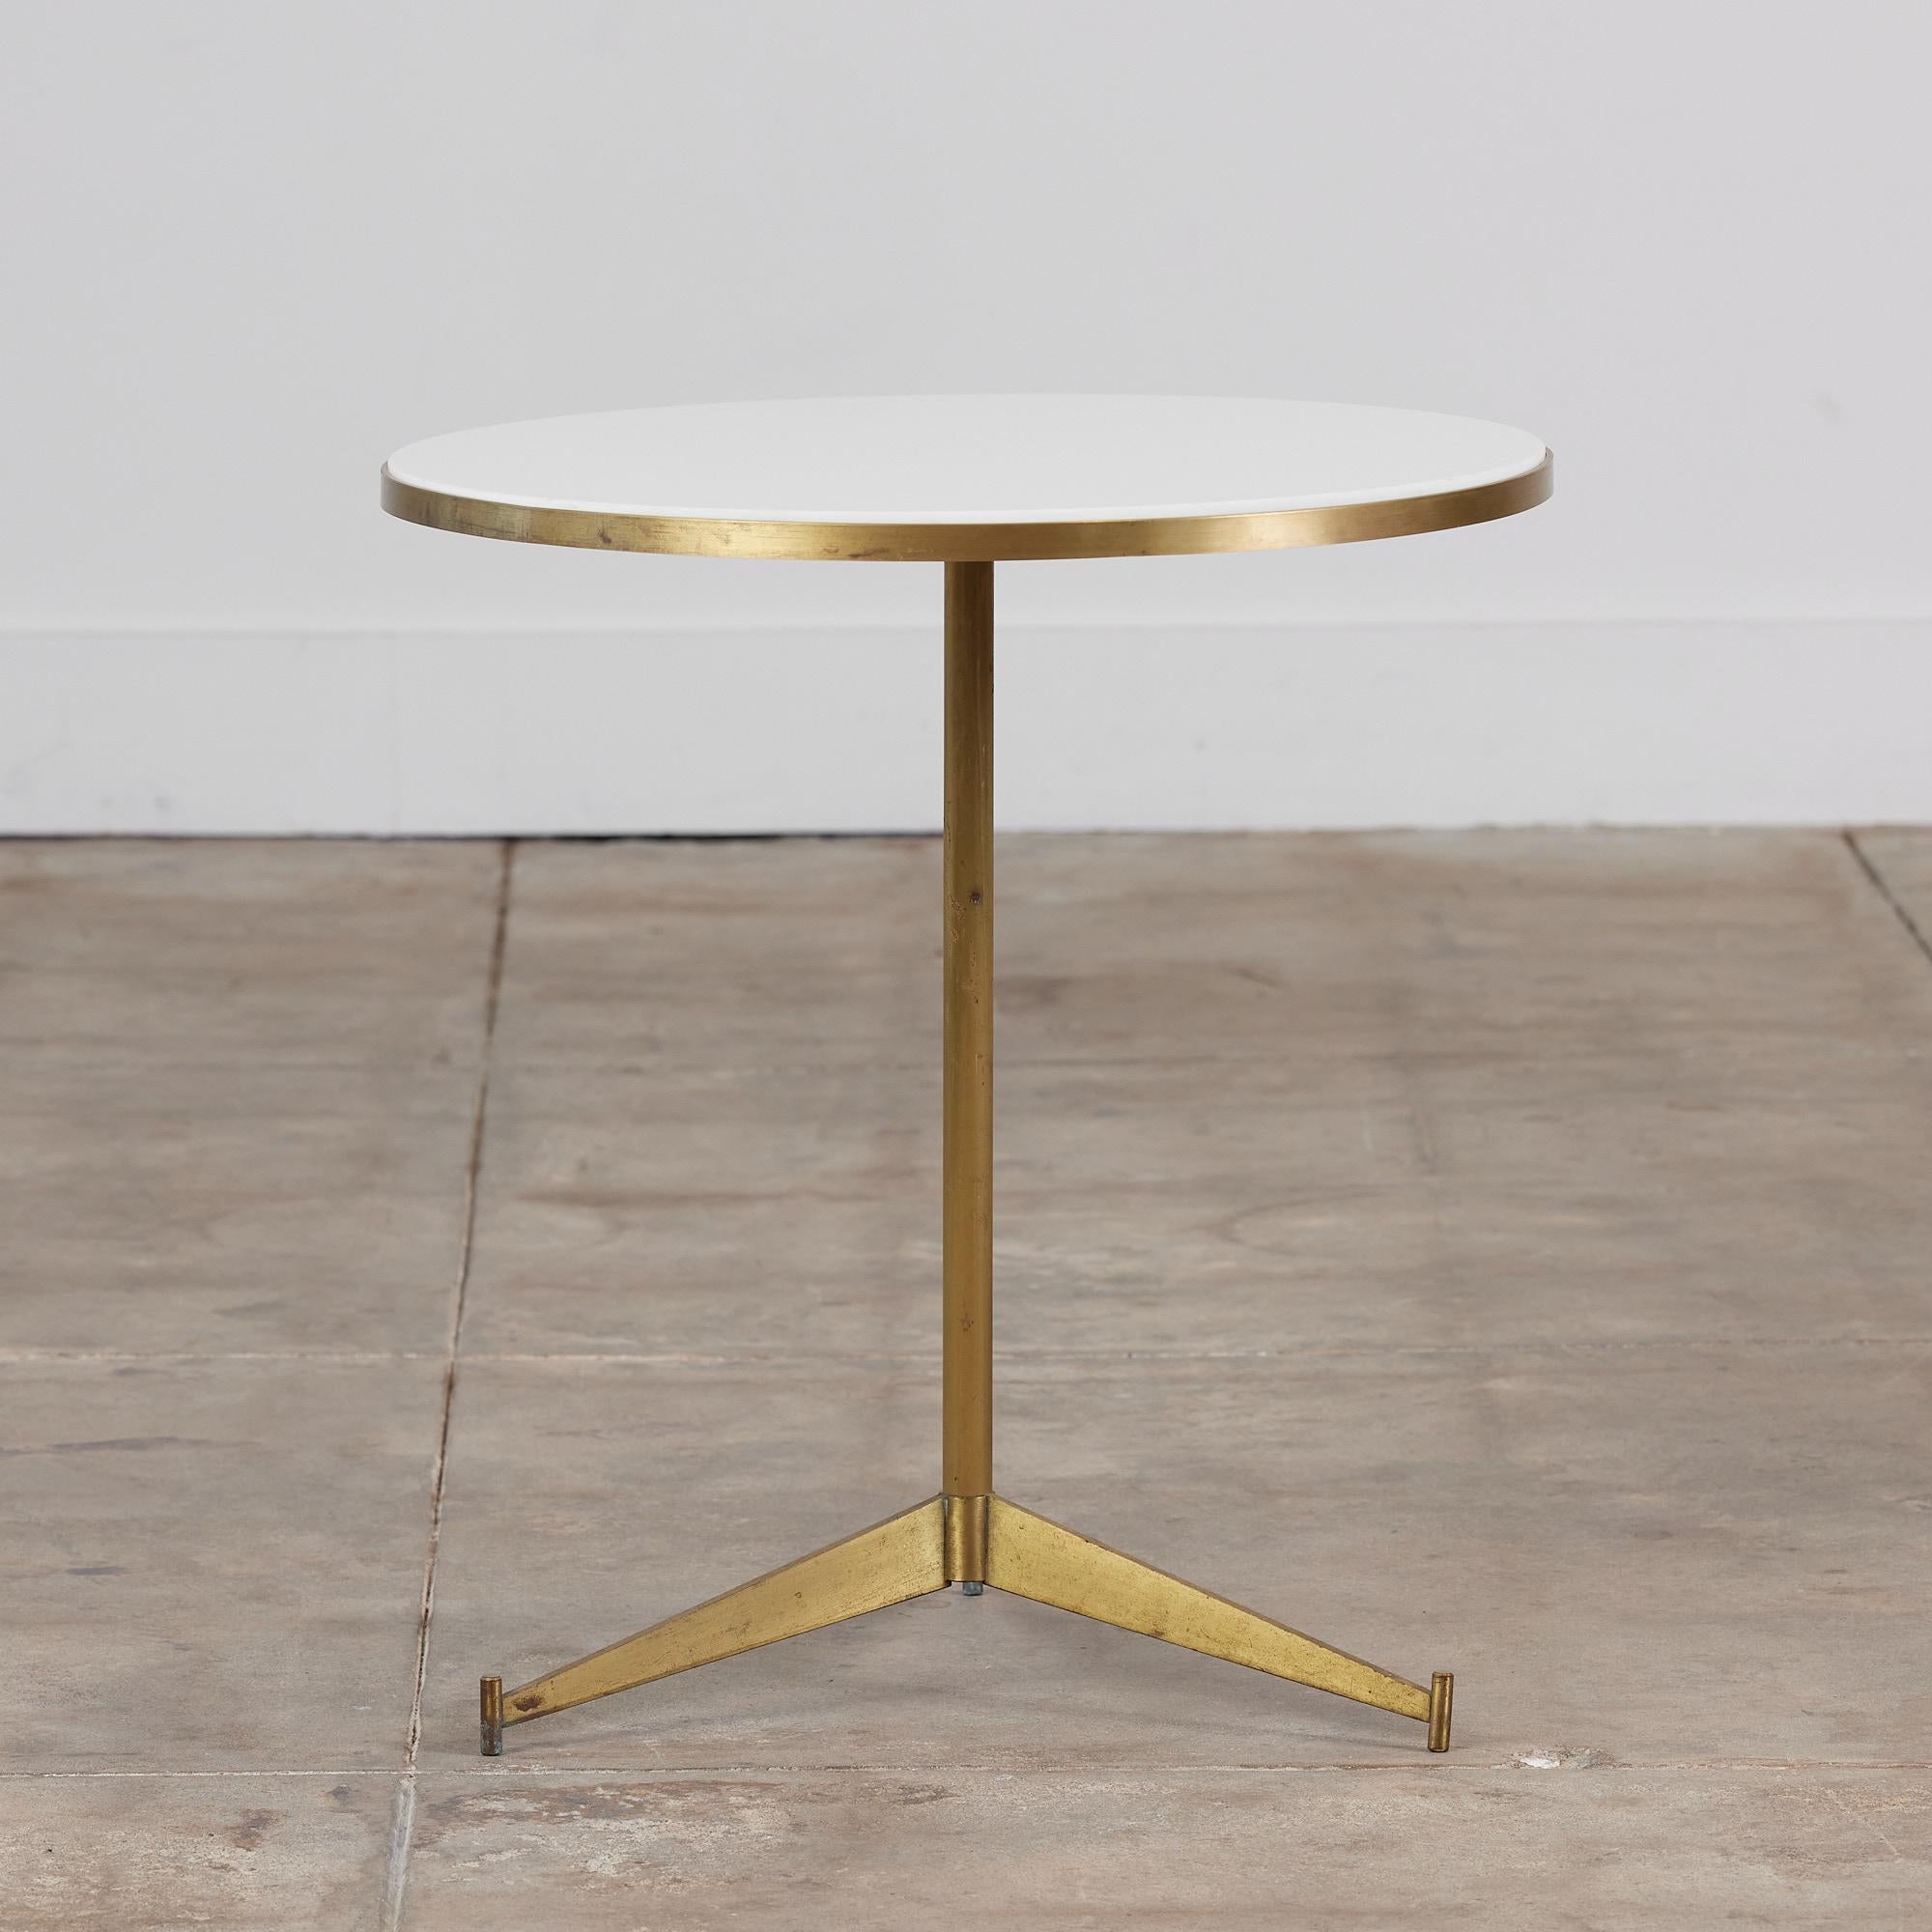 Paul McCobb brass and white vitrolite glass cigarette table for Directional, c. 1950s, USA. This table was only produced for a short period of time which makes it a rarer find. A round white vitrolite glass top rests inside the delicate brass frame.